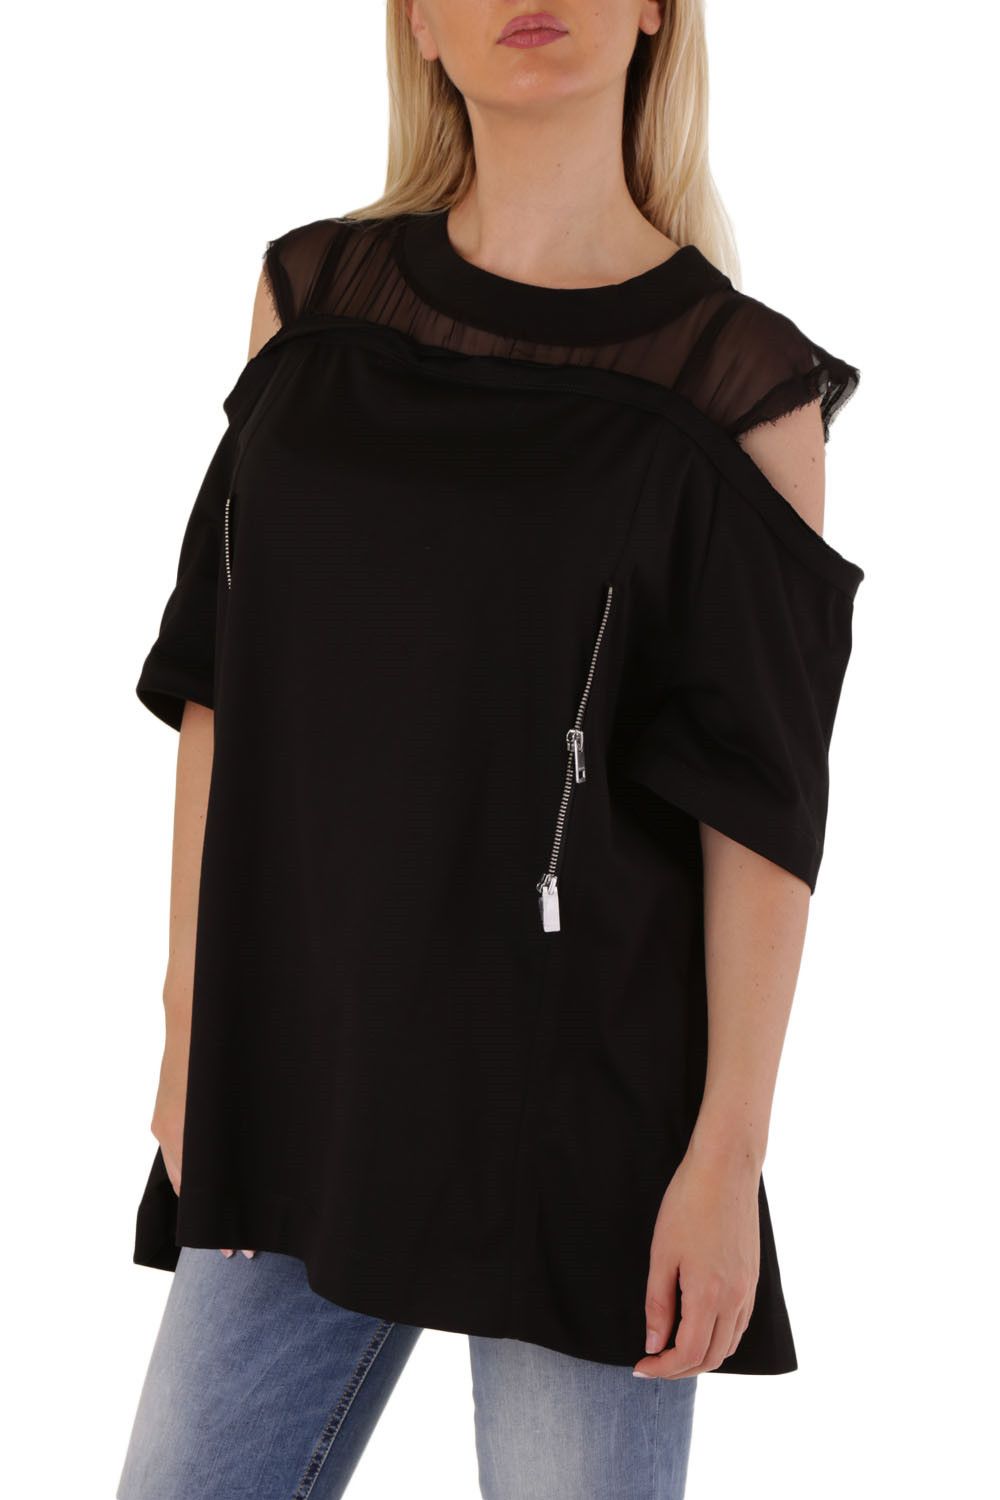 Brand: Diesel Gender: Women Type: T-shirts Season: Spring/Summer  PRODUCT DETAIL • Color: black • Pattern: plain • Sleeves: short • Neckline: round neck  COMPOSITION AND MATERIAL • Composition: -100% cotton  •  Washing: machine wash at 30°. print:plain. neckline:round-neck. sleeves:half-sleeves